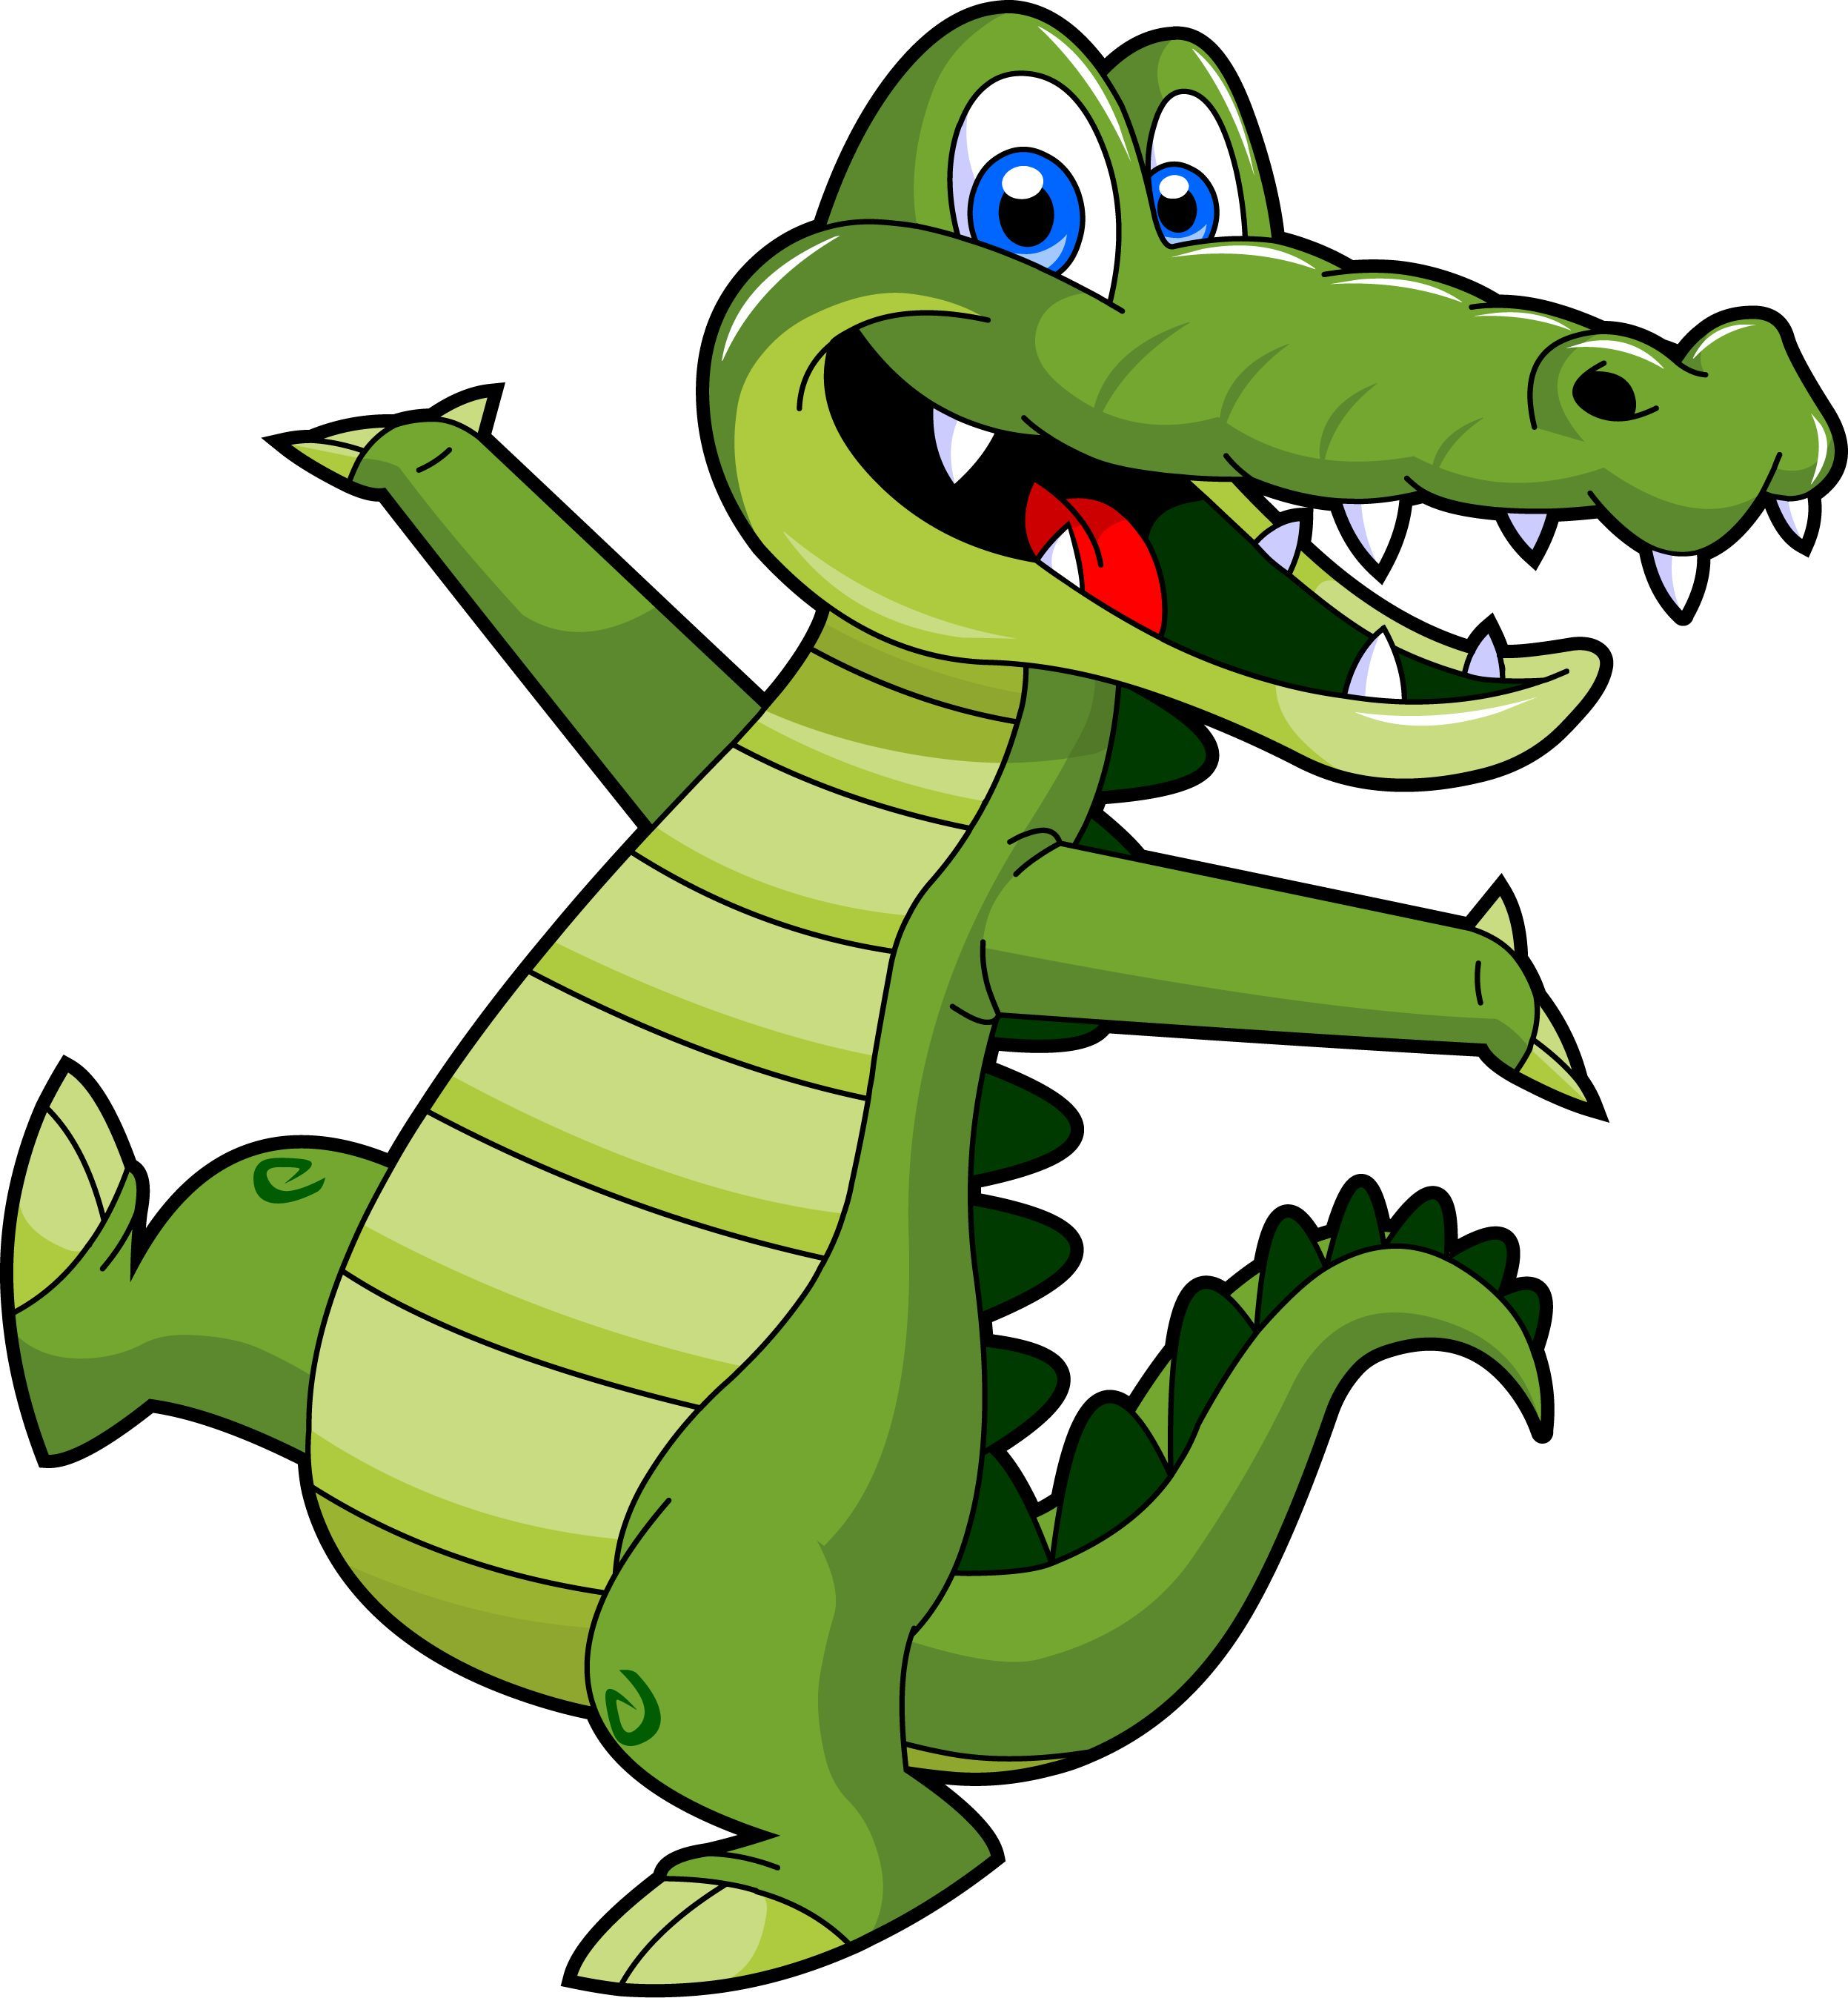 Cute baby free images. Hippo clipart alligator